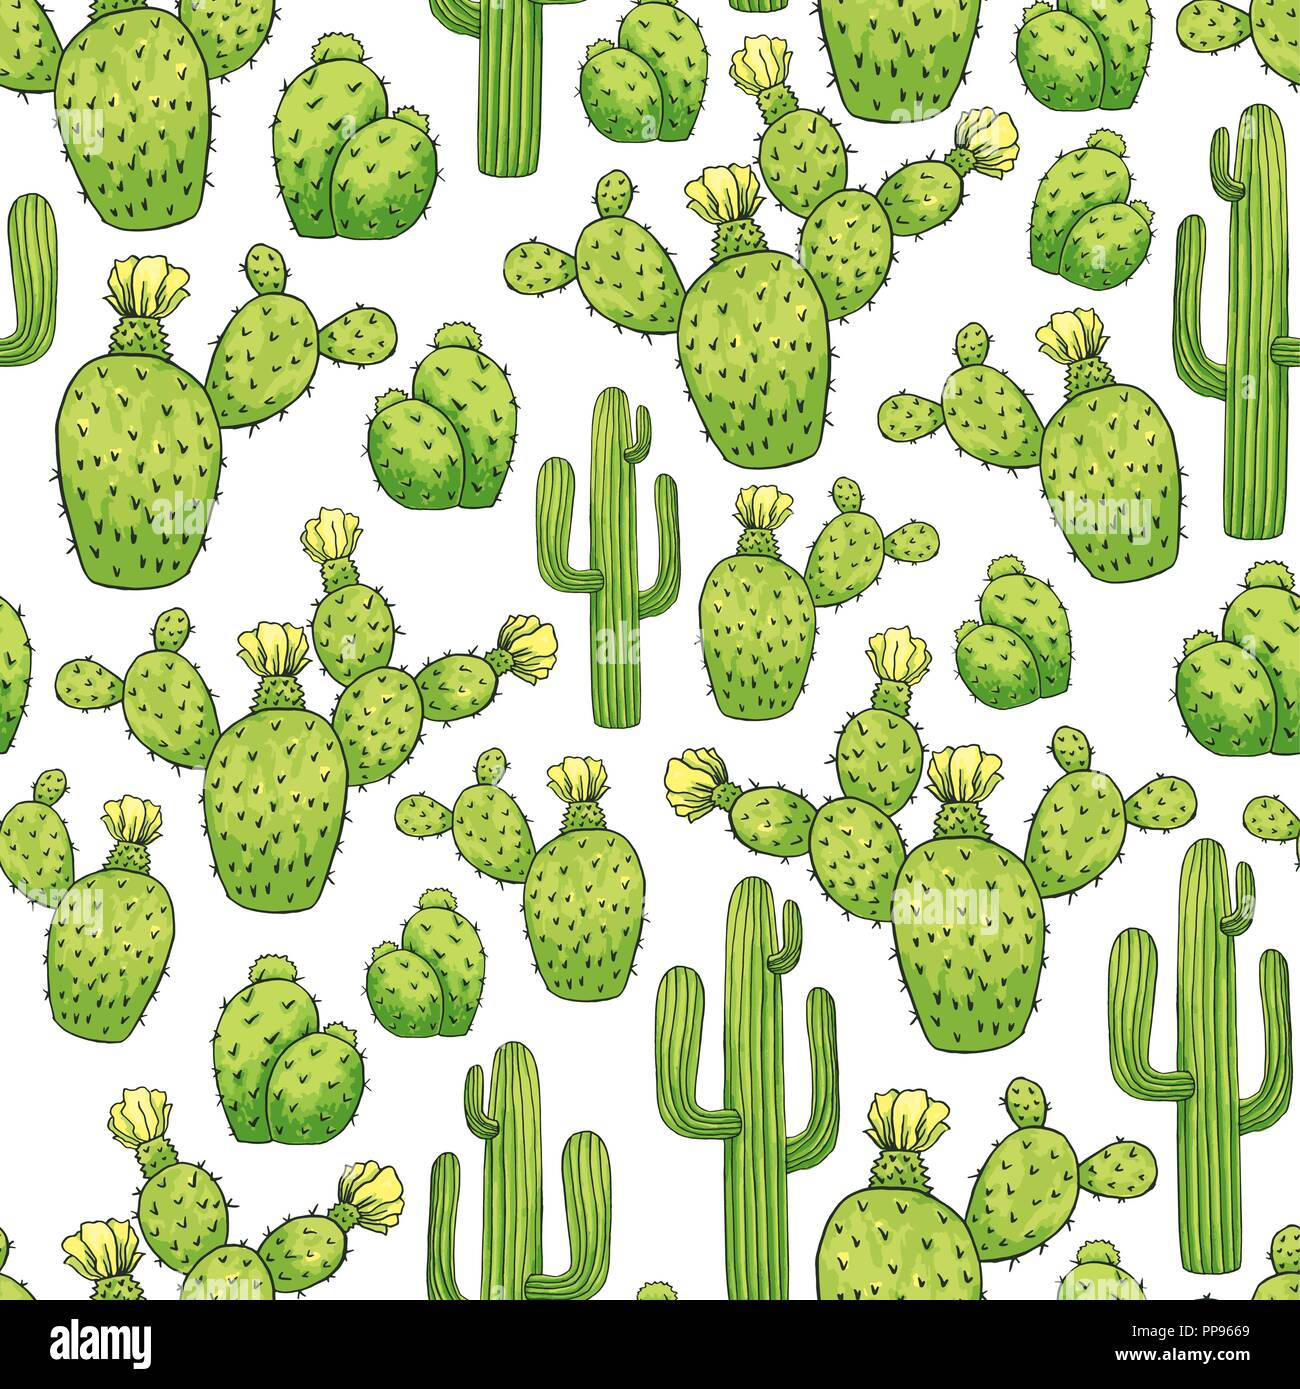 Mexican Cactus Seamless Pattern. Green Color. Spines or Thorns and Flowers. Edible Esculent Cacti Like Saguaro, Indian Fig or Mammillaria. Latin theme for Wallpaper or Fabric Textile Printing Design Stock Vector